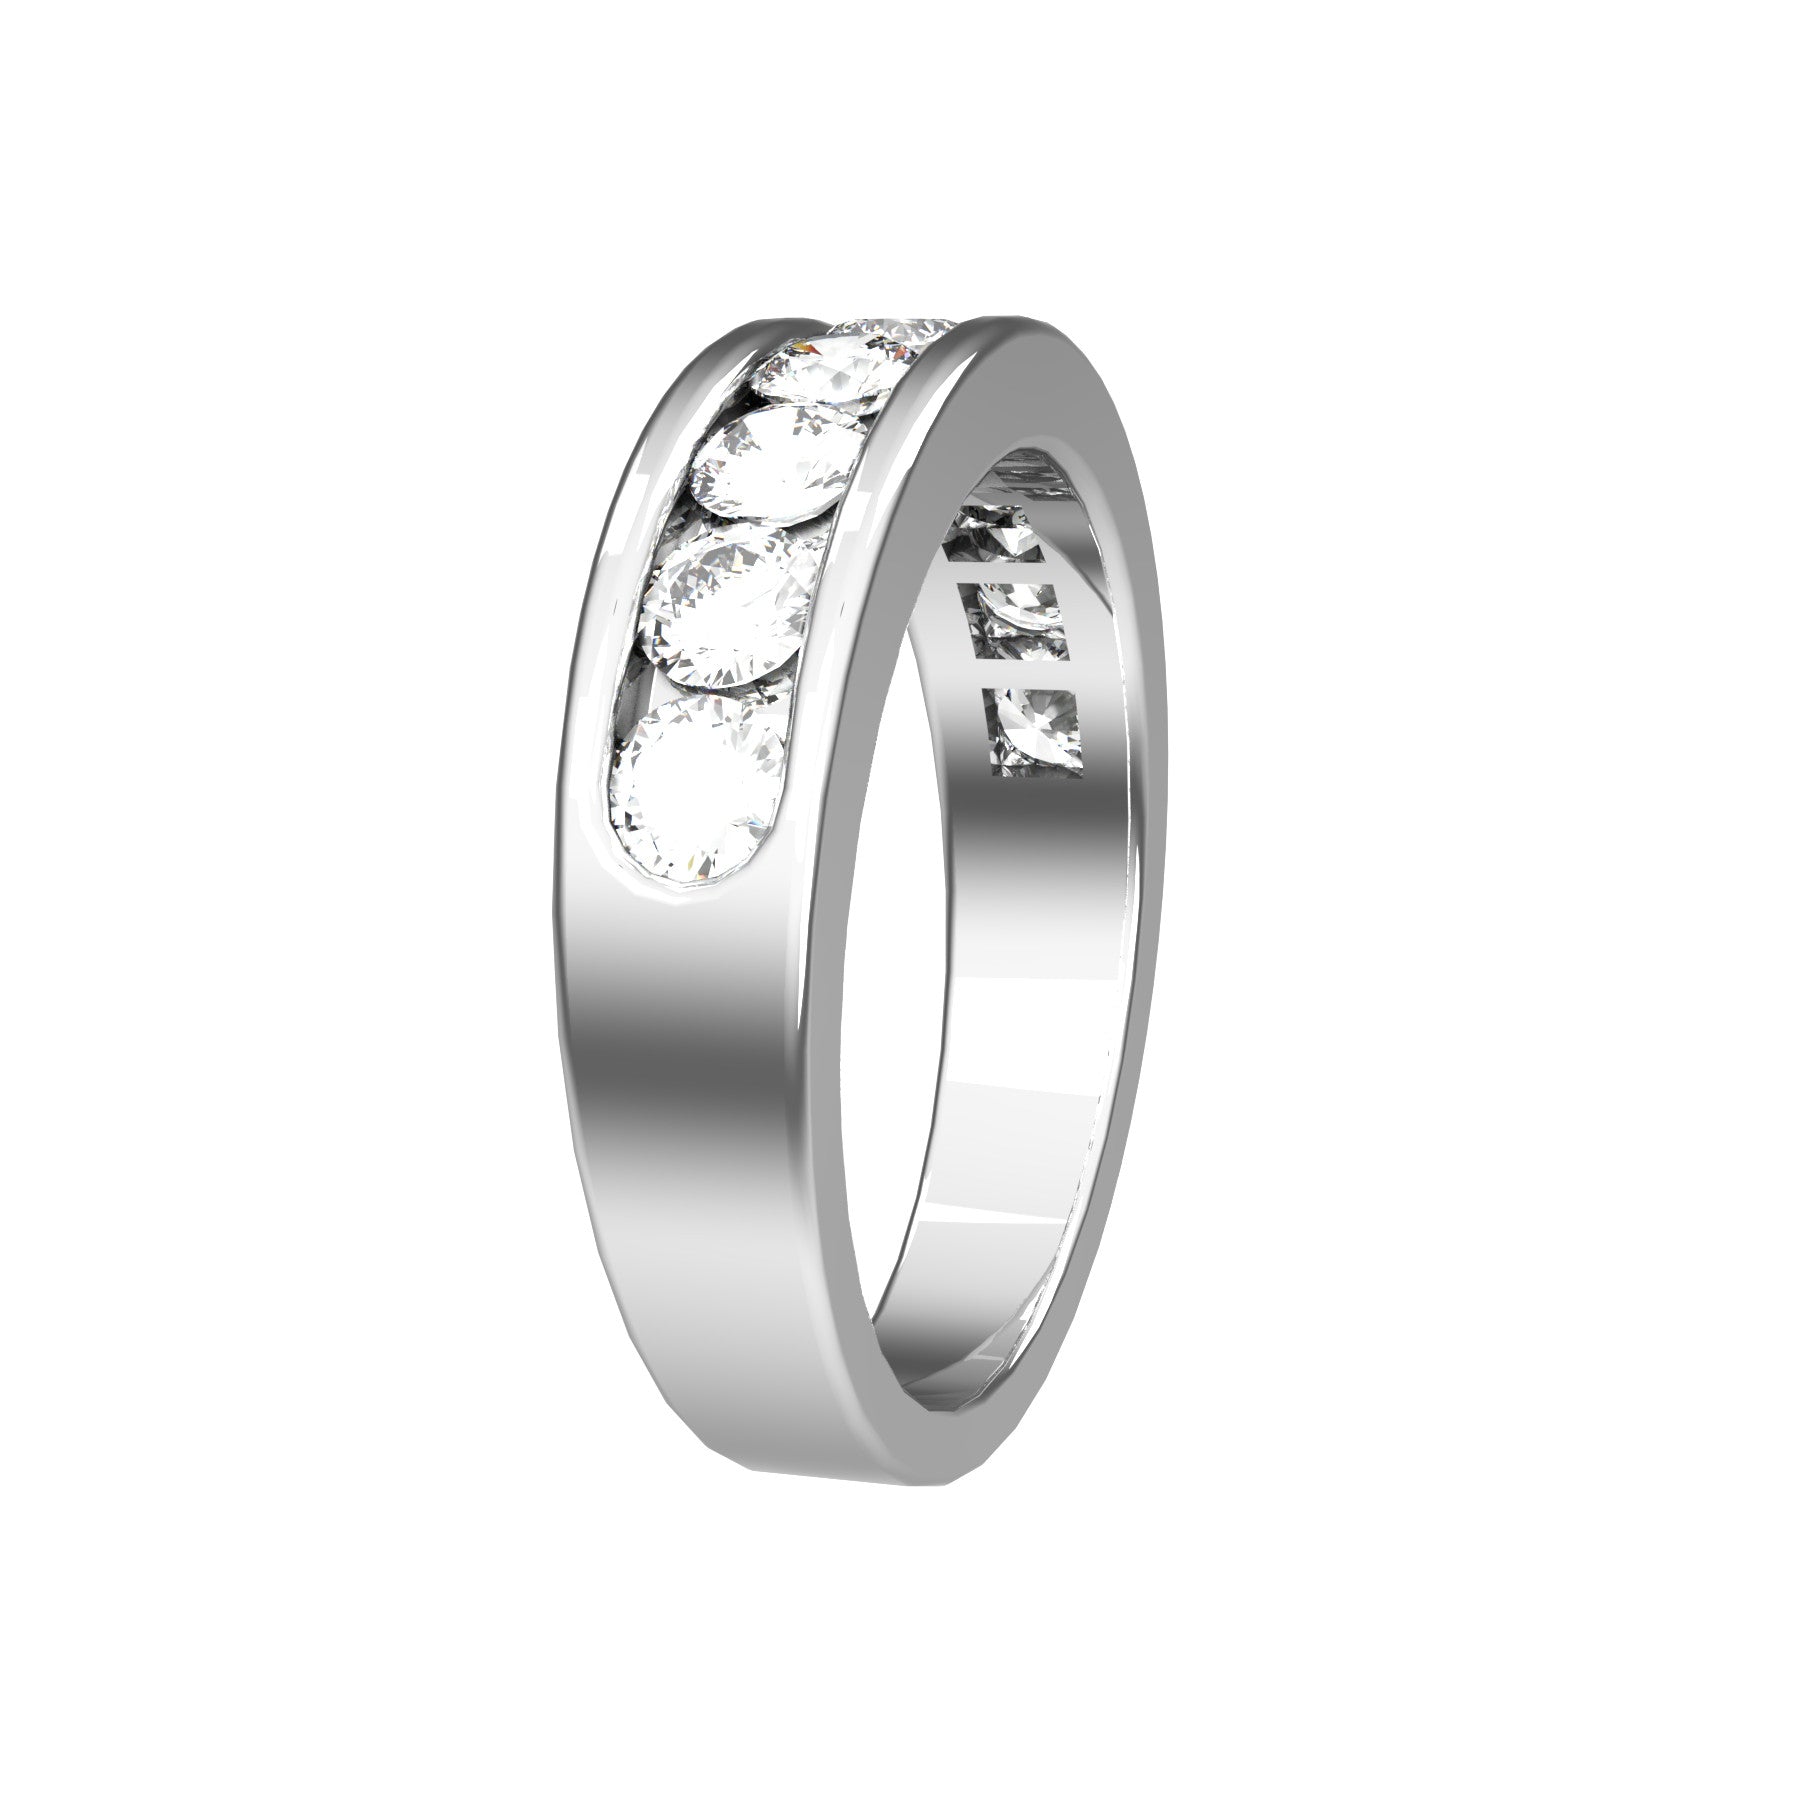 perpetual half wedding ring , 18 K white gold, 0,10 ct round natural diamond, weight about 5,3 g. (0.18 oz), width 5,20 mm